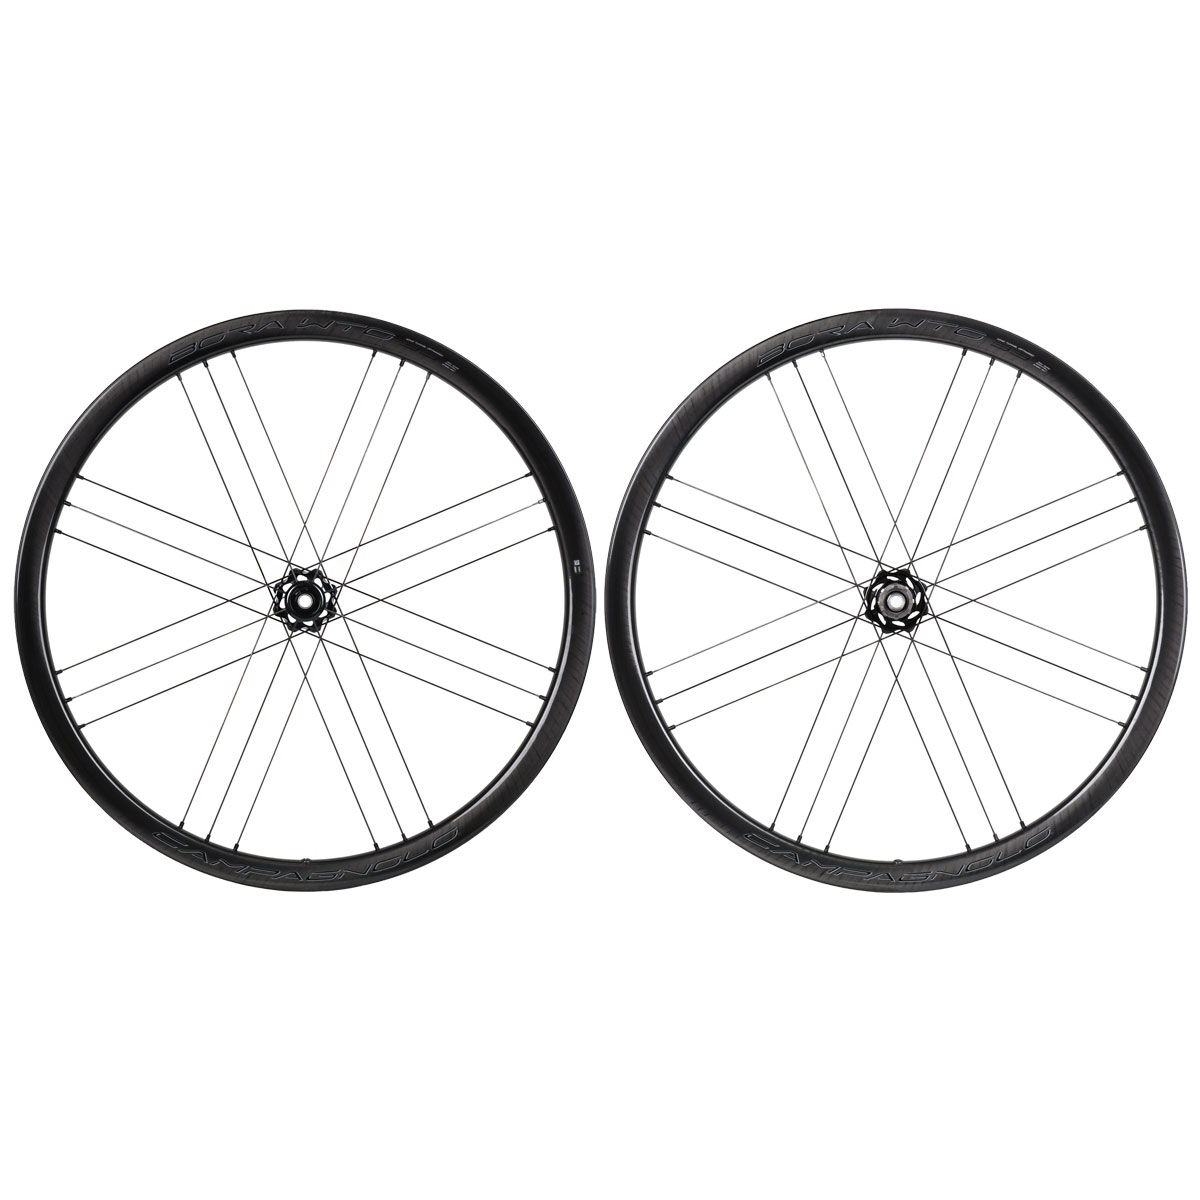 Picture of Campagnolo Bora WTO 33 DB - 28 Inch Wheelset - Carbon - AFS - Tubeless/Clincher - 2-Way Fit - 12x100mm | 12x142mm - Campagnolo ED - Dark